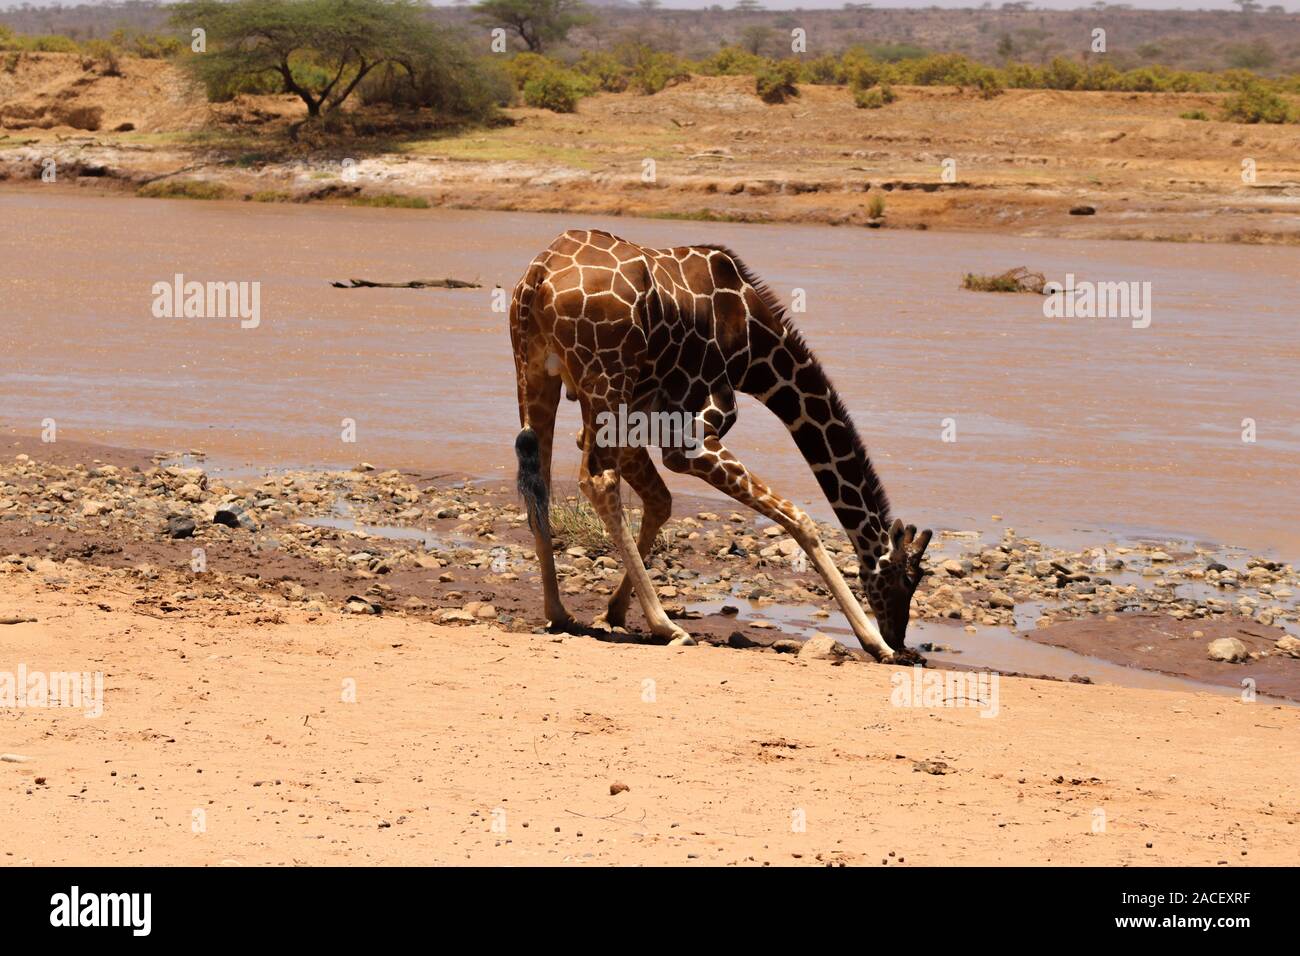 A reticulated giraffe bending to drink water from the Ewaso Nyiro river in the hot and dry Samburu National Reserve. Stock Photo